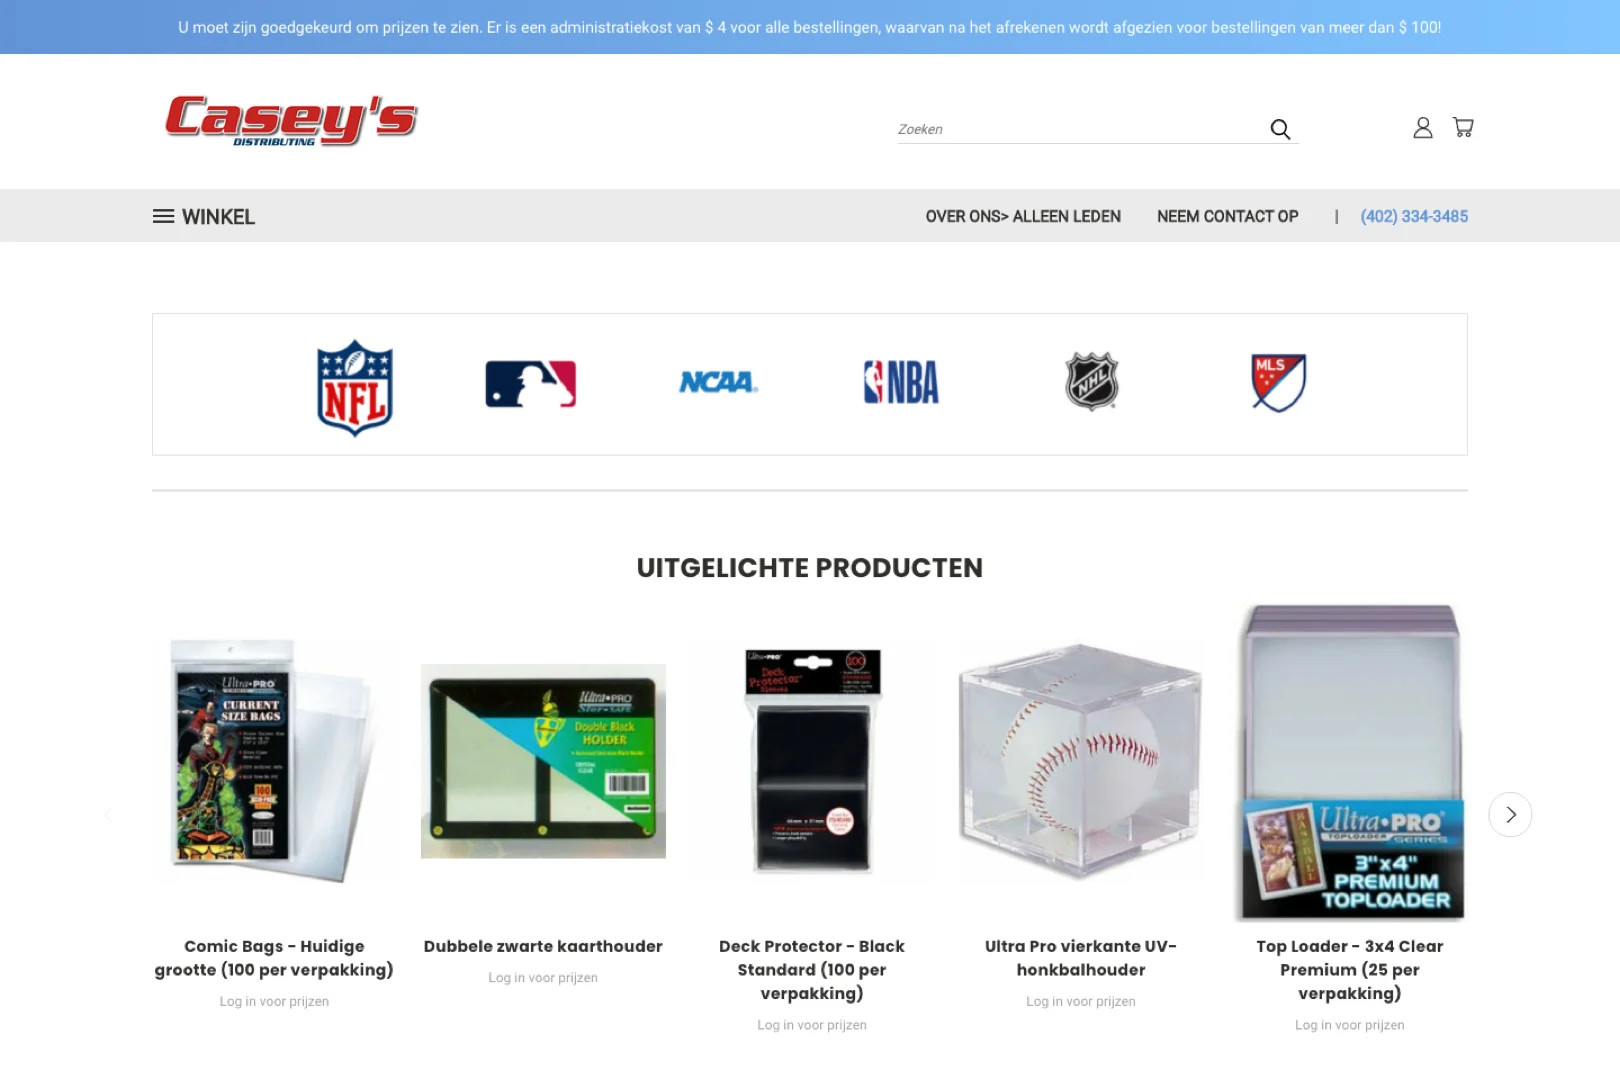 https://www-cdn.bigcommerce.com/assets/dutch-storefront-featured-products-casey-distribution.png